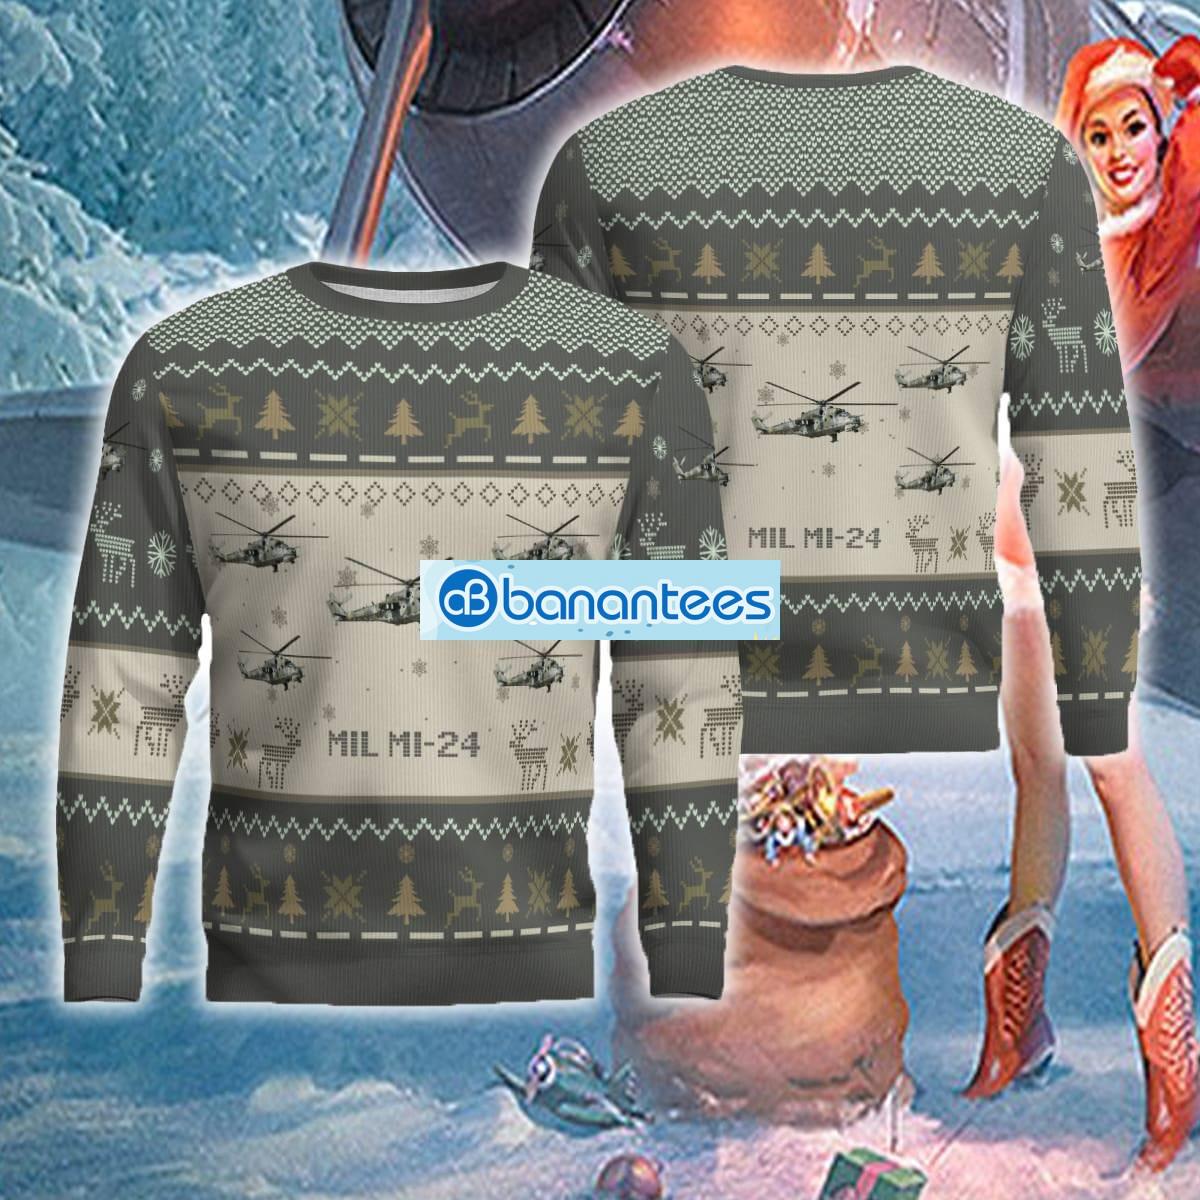 US Air Force Mil Mi-24 Aircraft Knitted Xmas 3D Sweater Gift For Men Women - Mil Mi-24 Aircraft Ugly Christmas Sweater US Air Force Photo 1